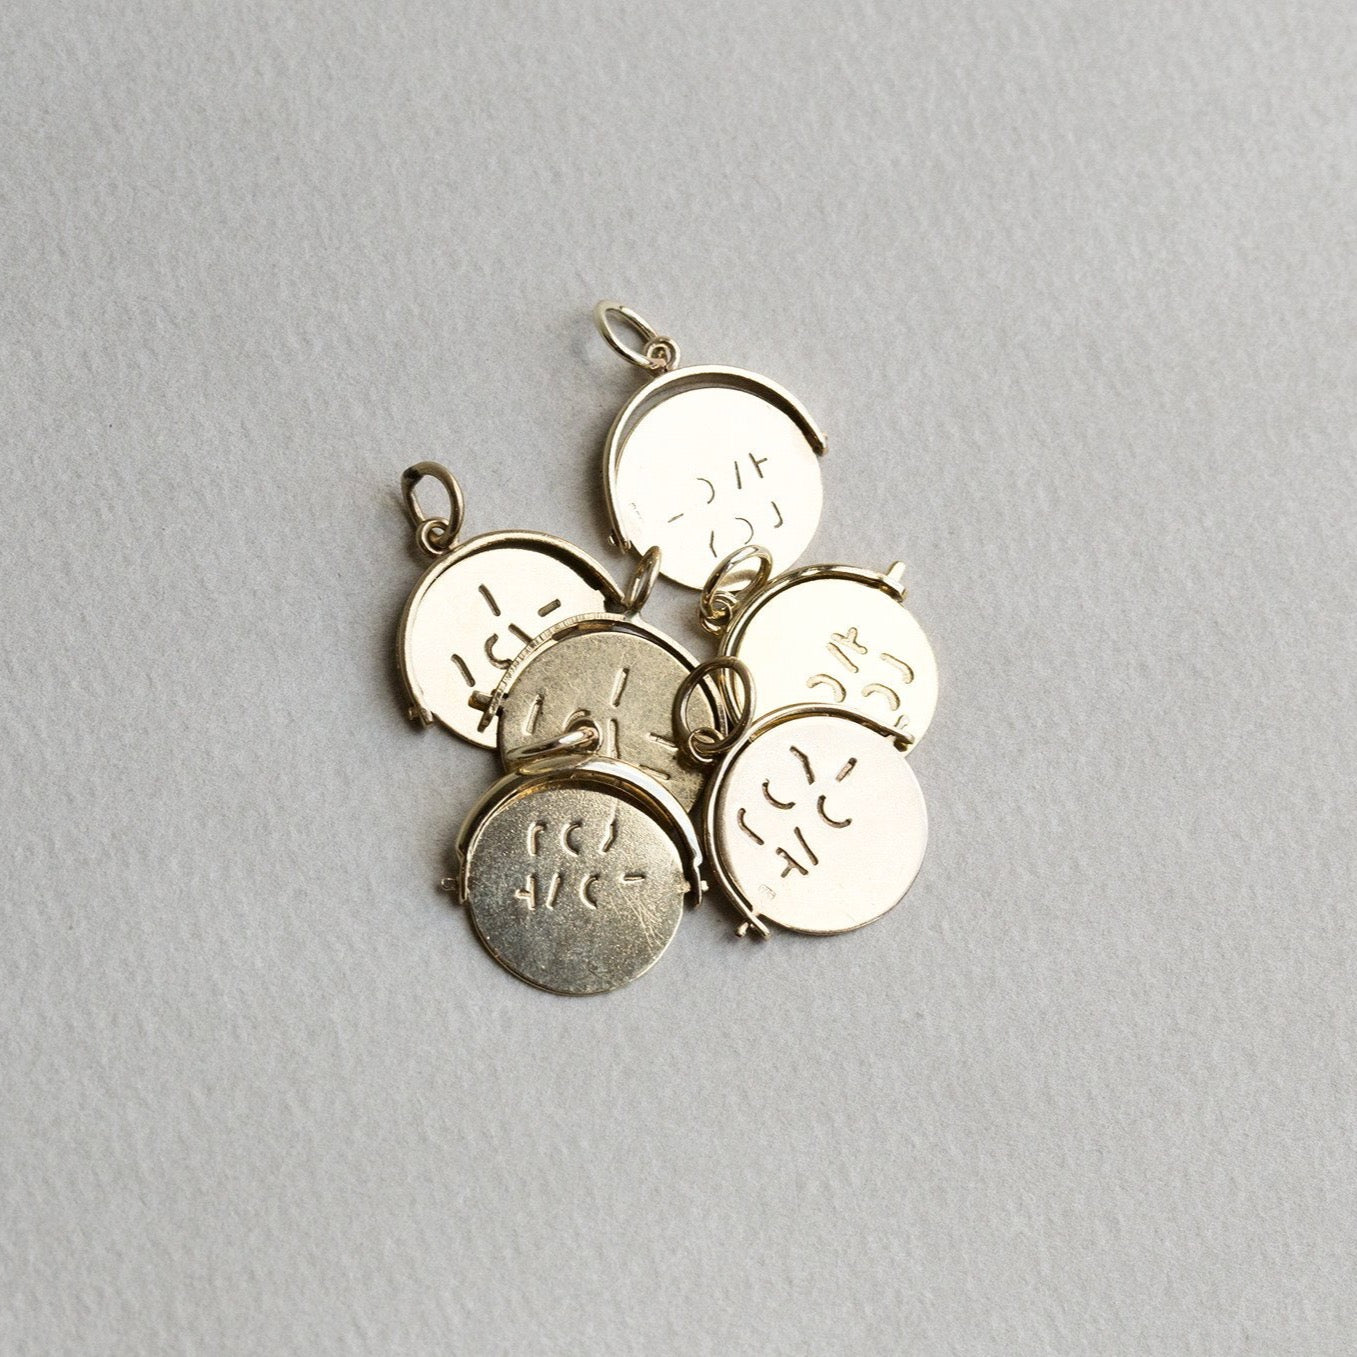 these vintage pendants although very similar, will vary slightly in form or lettering